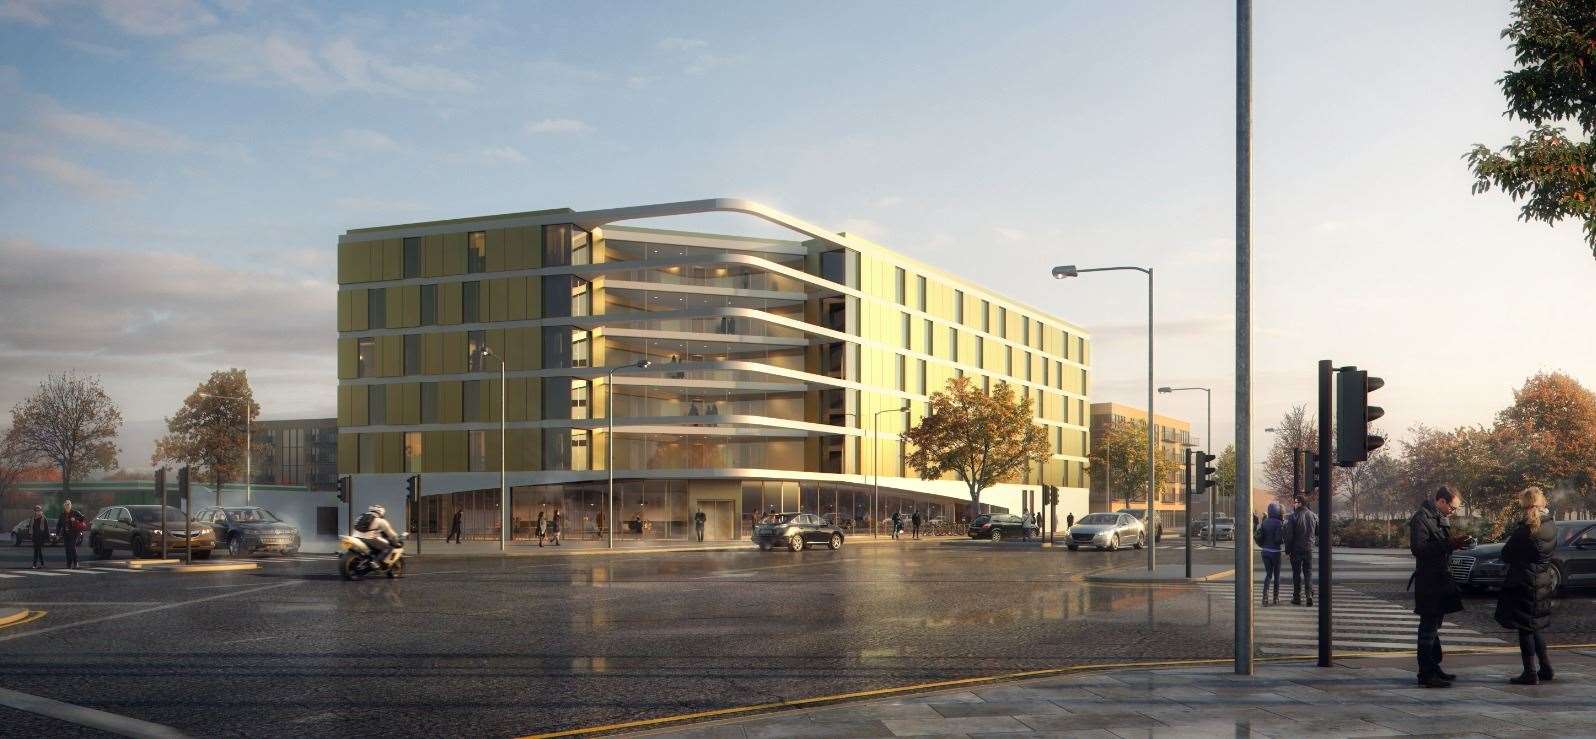 This image released to KentOnline shows how the 140-bedroom hotel is set to look